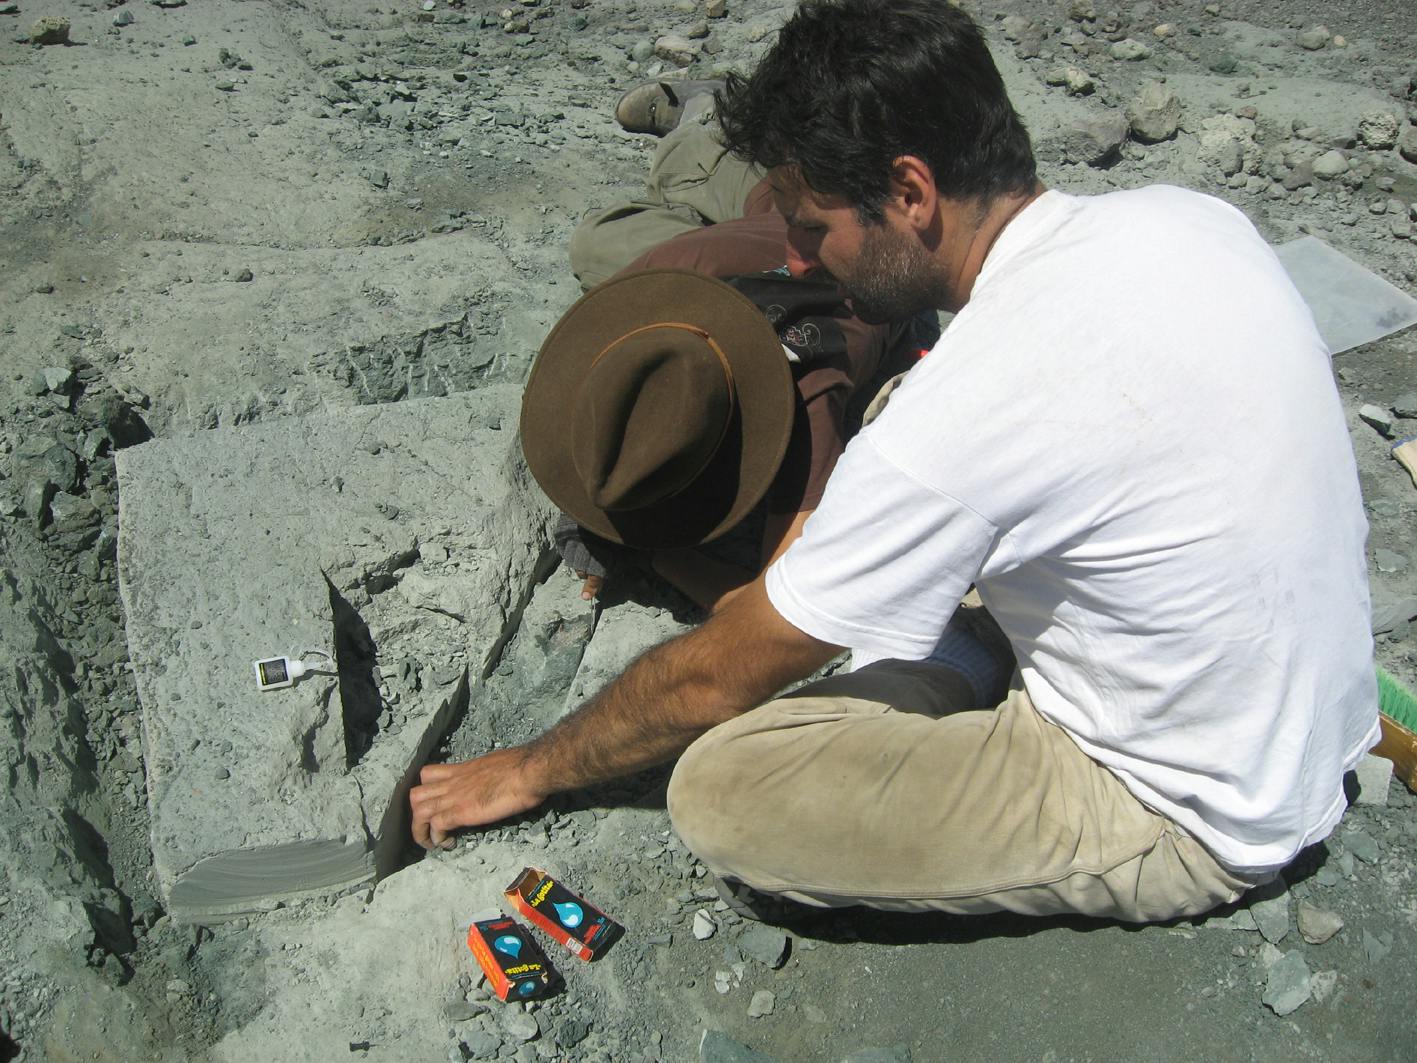 Excavation of a Chilesaurus skeleton from beds in the Toqui Formation, Southern Andes, Chile